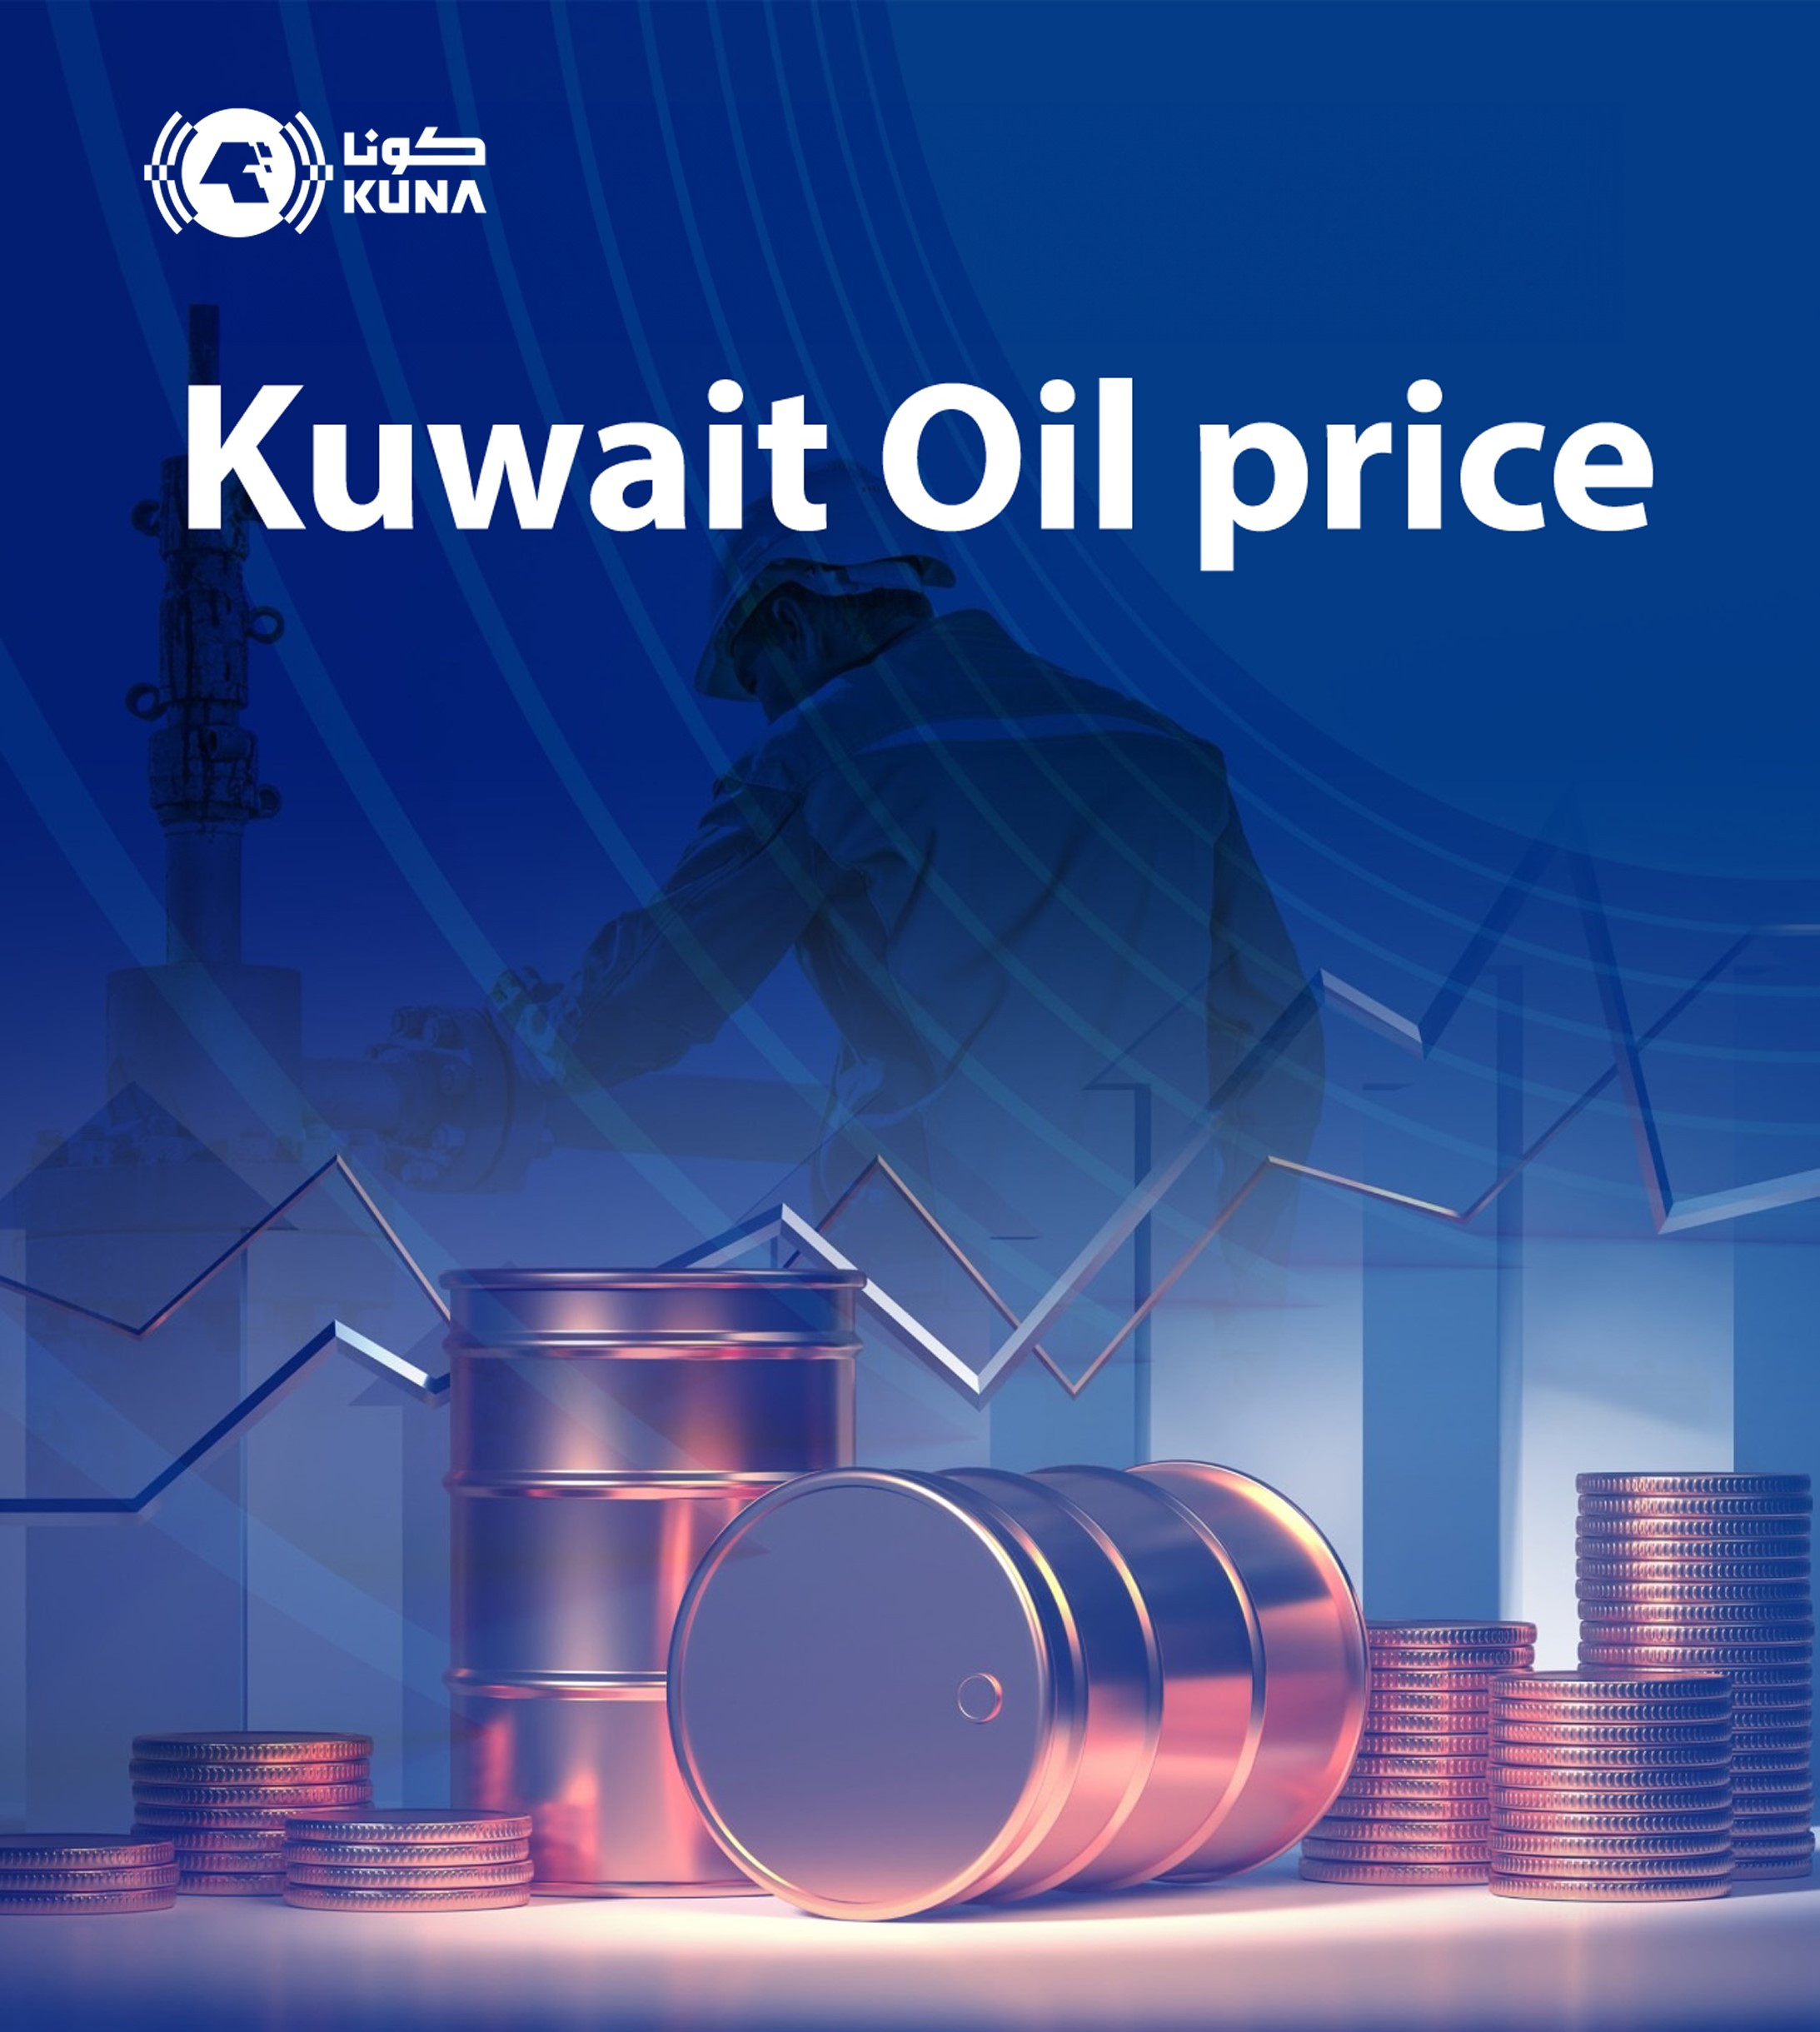 Kuwait oil price up by 14 cents to USD 85.26 pb                                                                                                                                                                                                           